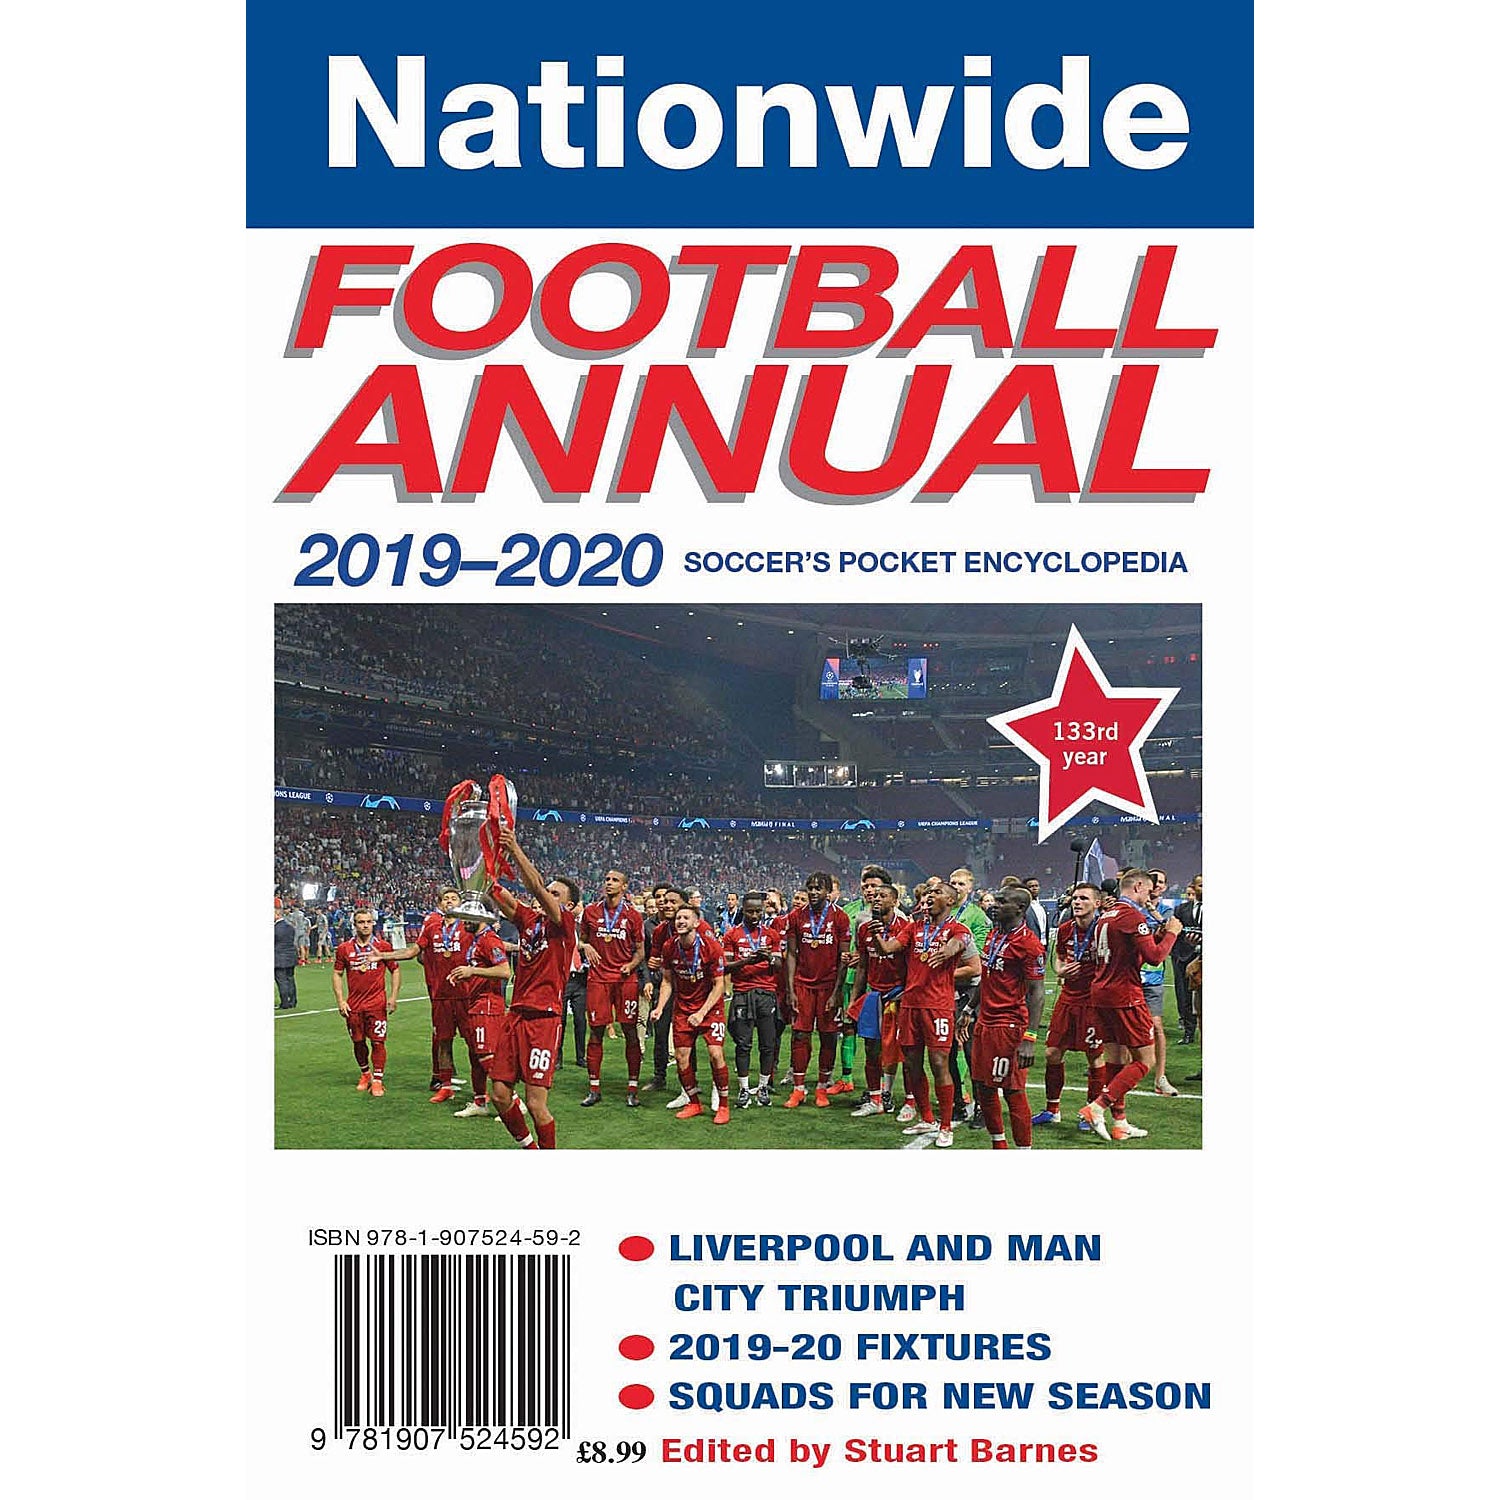 Nationwide Football Annual 2019-2020 (News of the World)